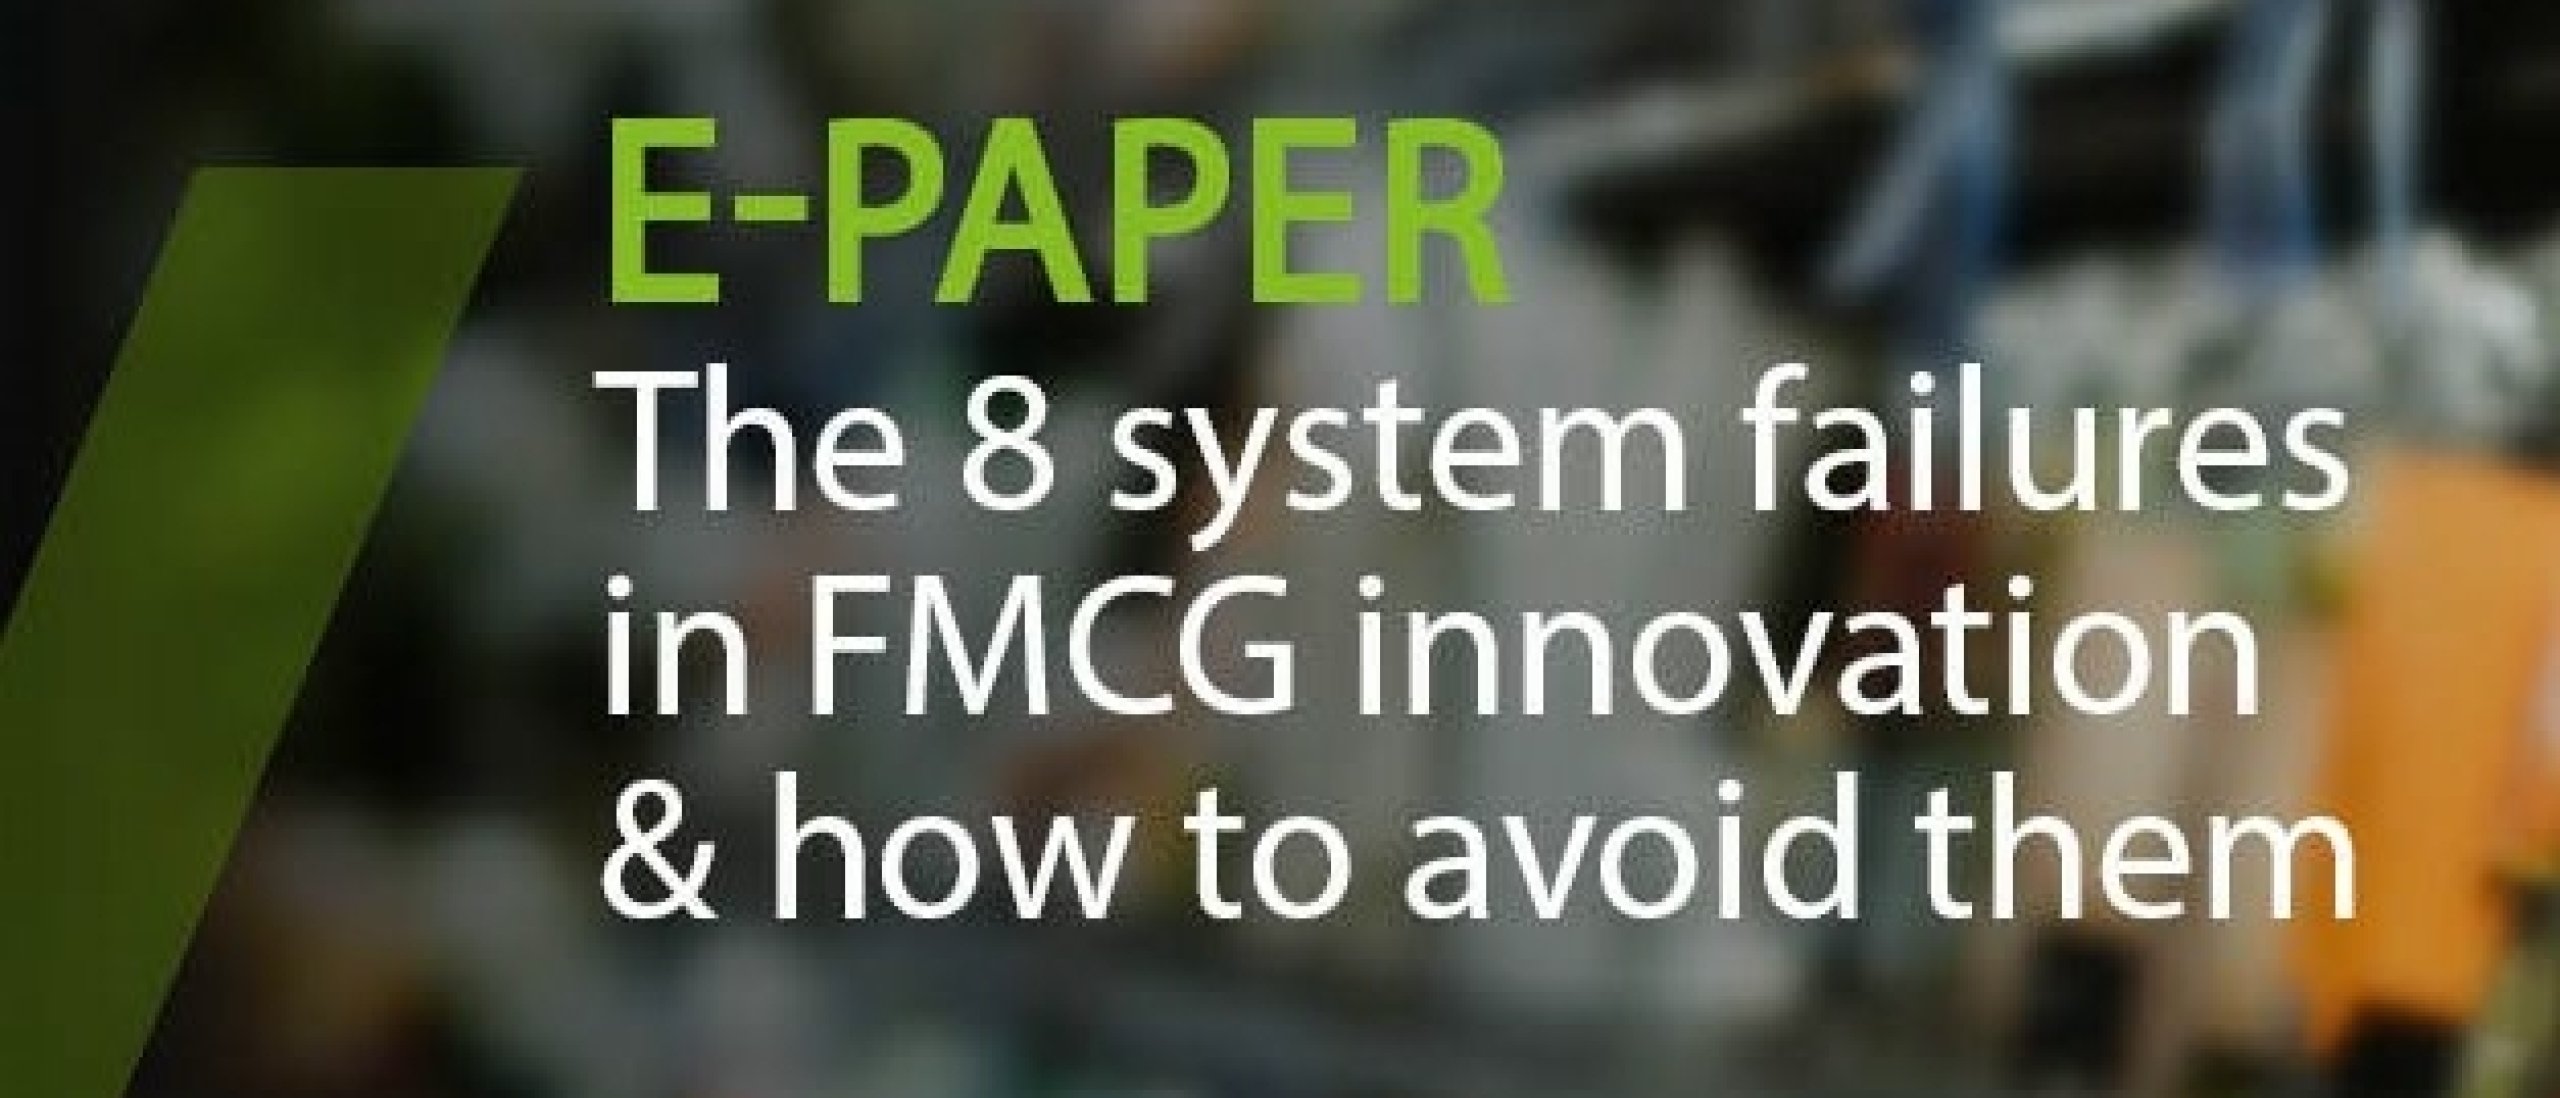 E-paper: The 8 system failures in FMCG innovation